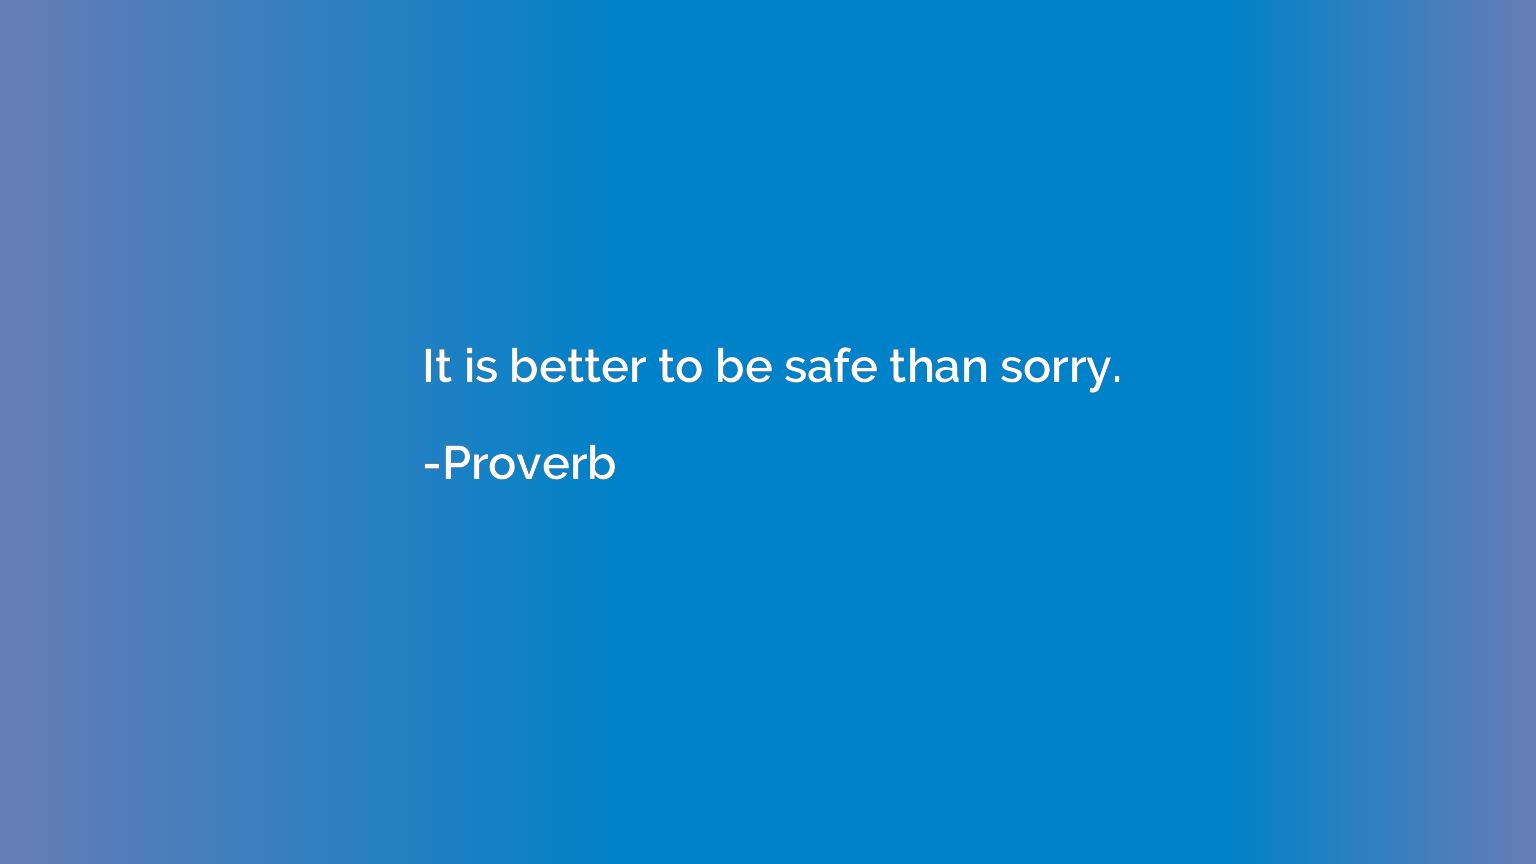 It is better to be safe than sorry.